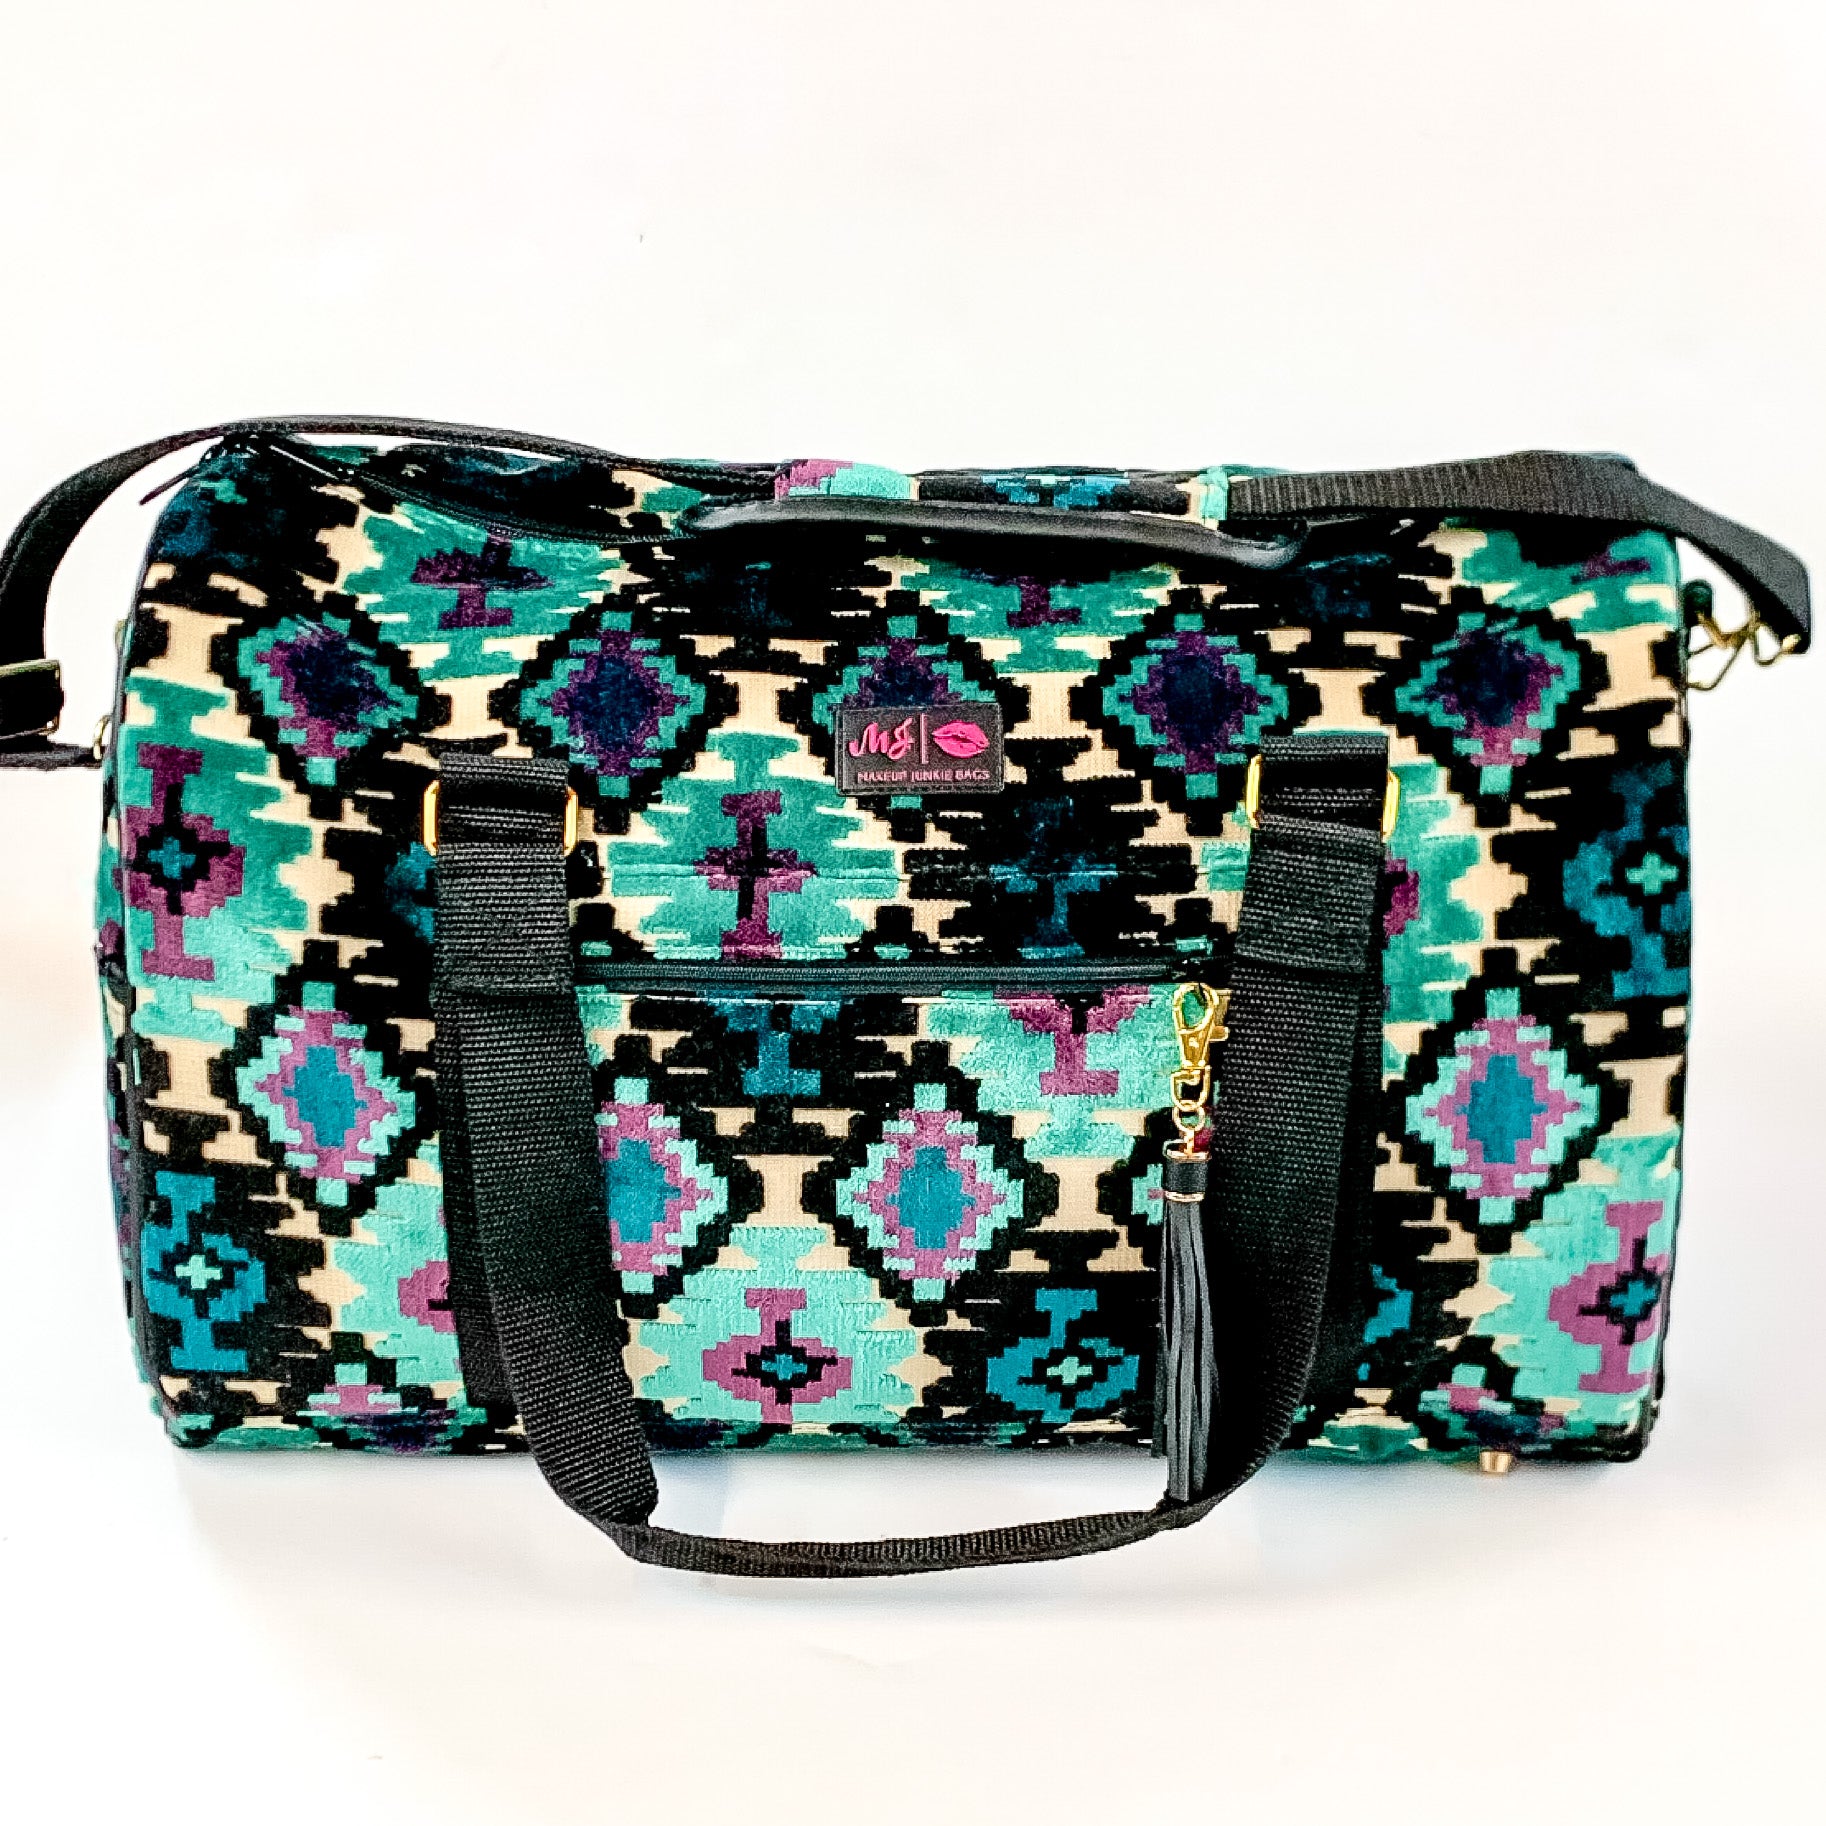 Makeup Junkie | Midnight Aztec Duffel Bag in Turquoise Green and Black Mix - Giddy Up Glamour Boutique